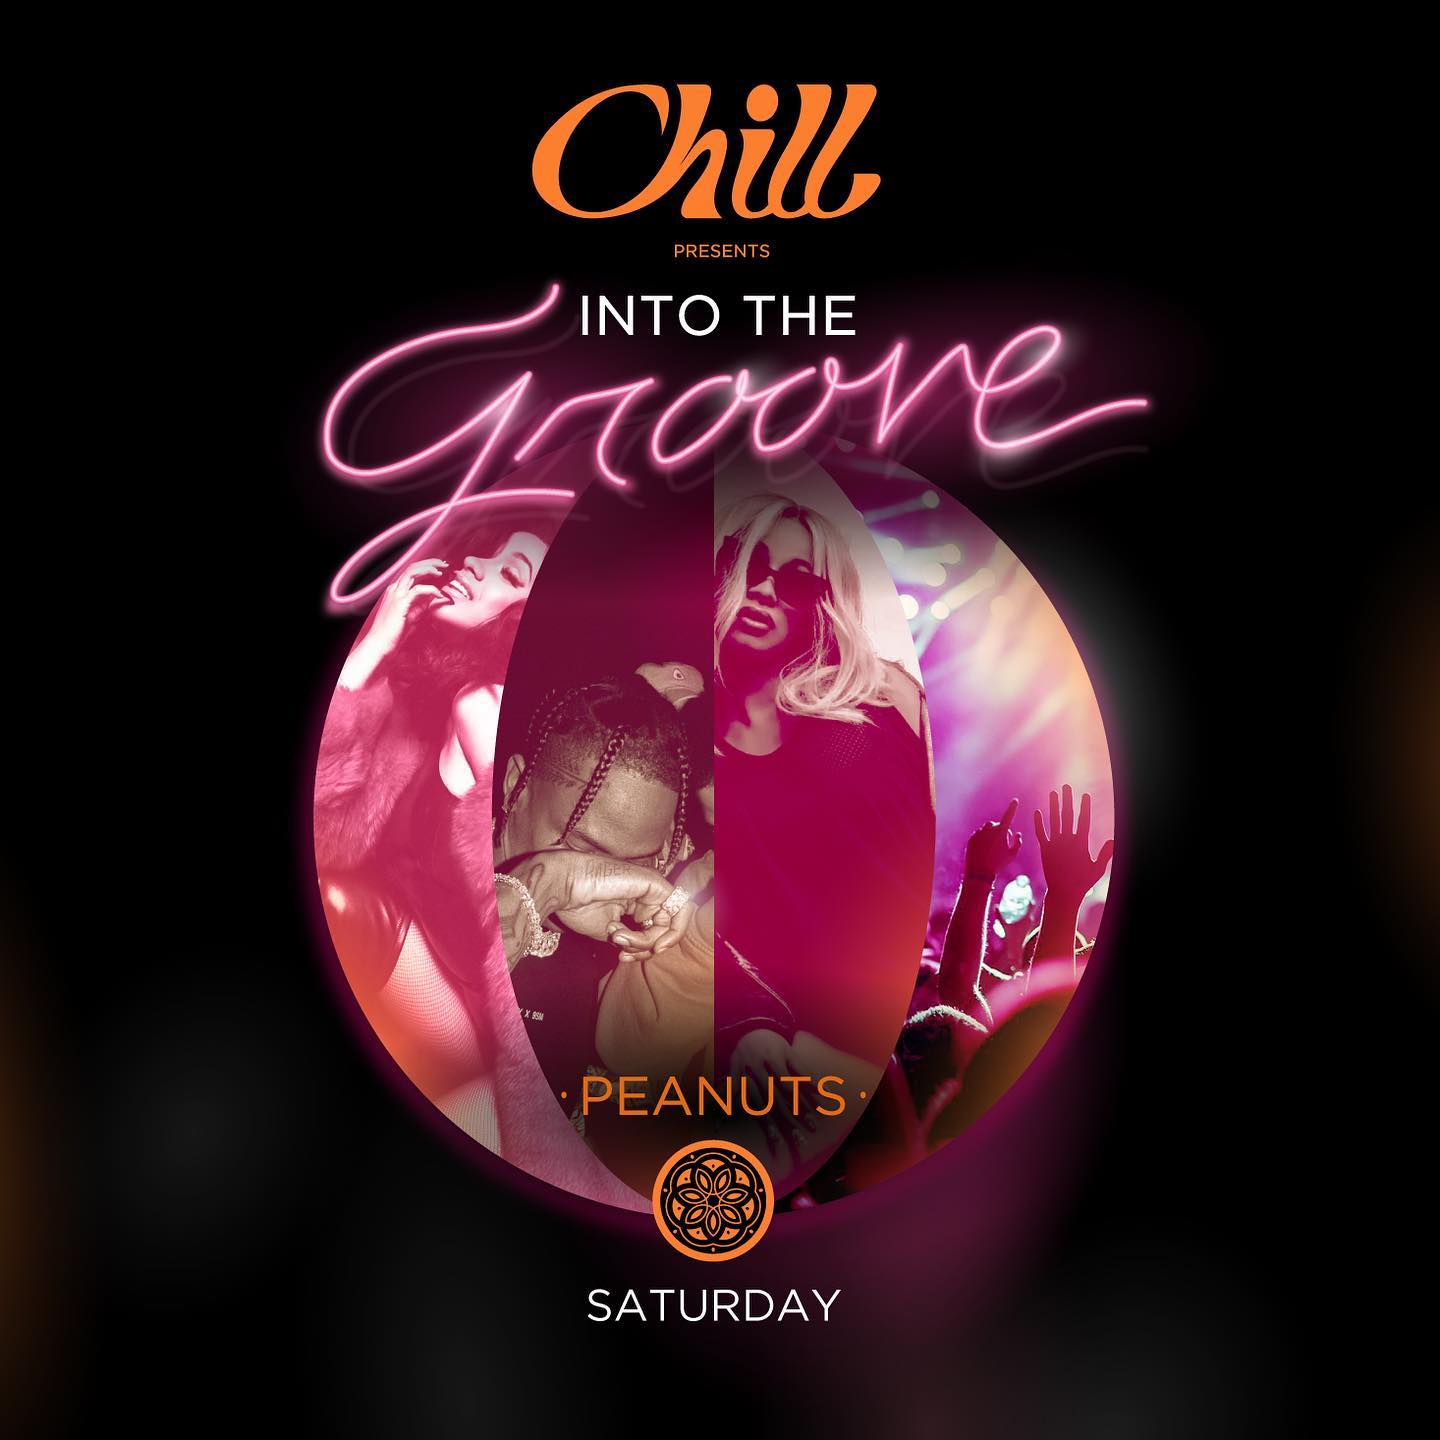 Evening in the groove at Chill